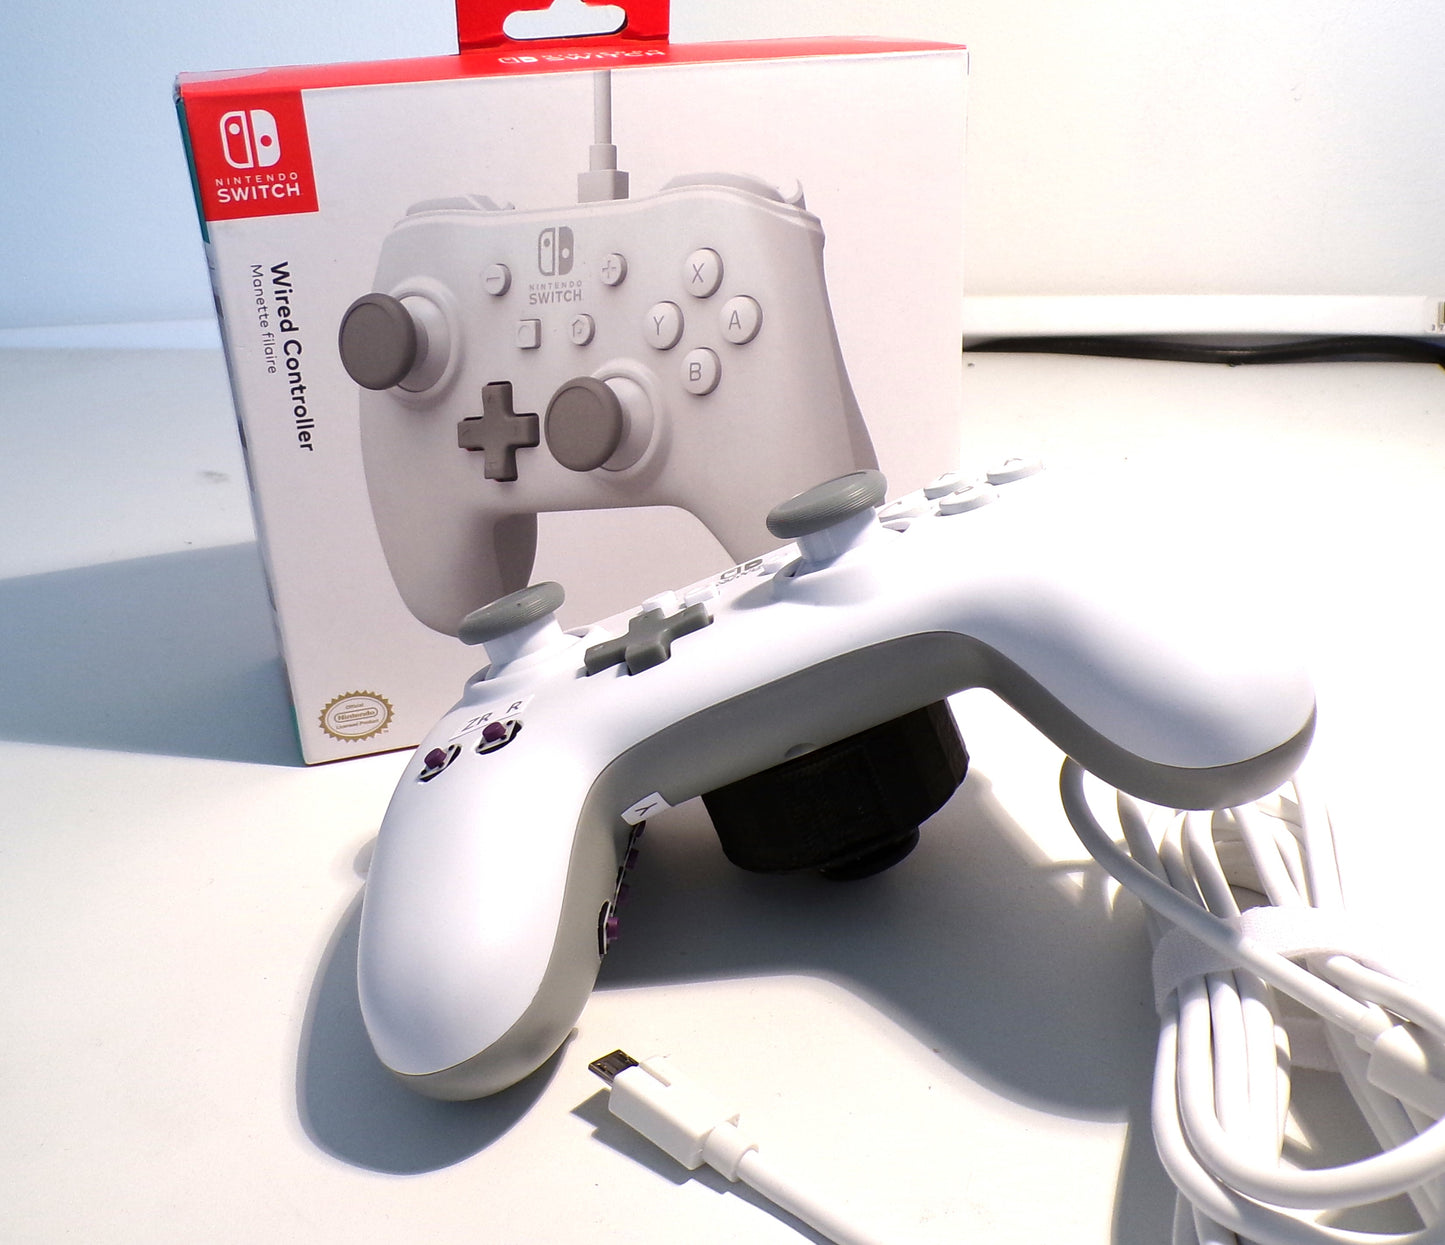 Nintendo Switch controller for left hand gamers